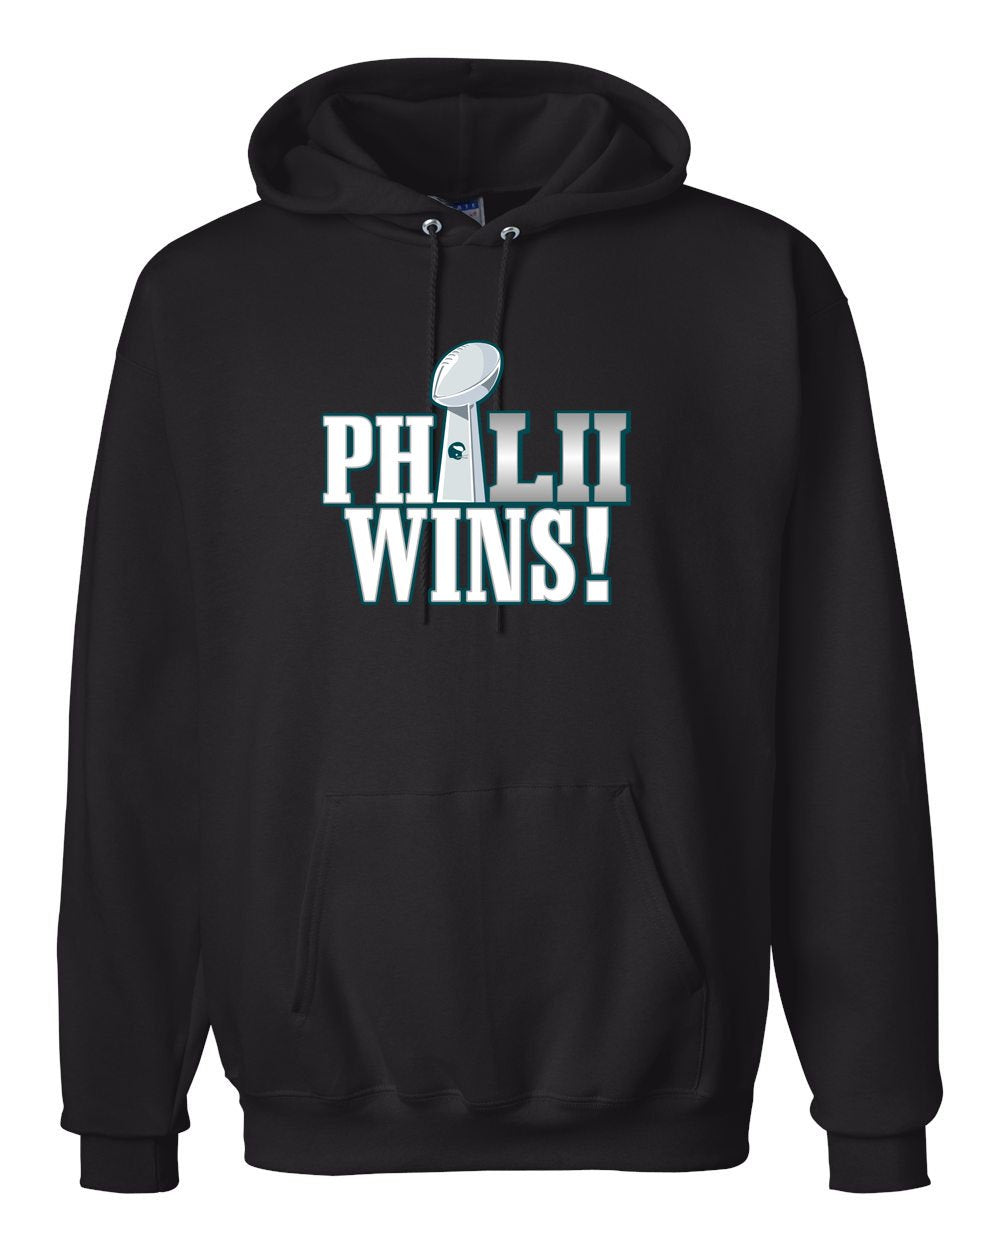 Philly Wins! Hoodie